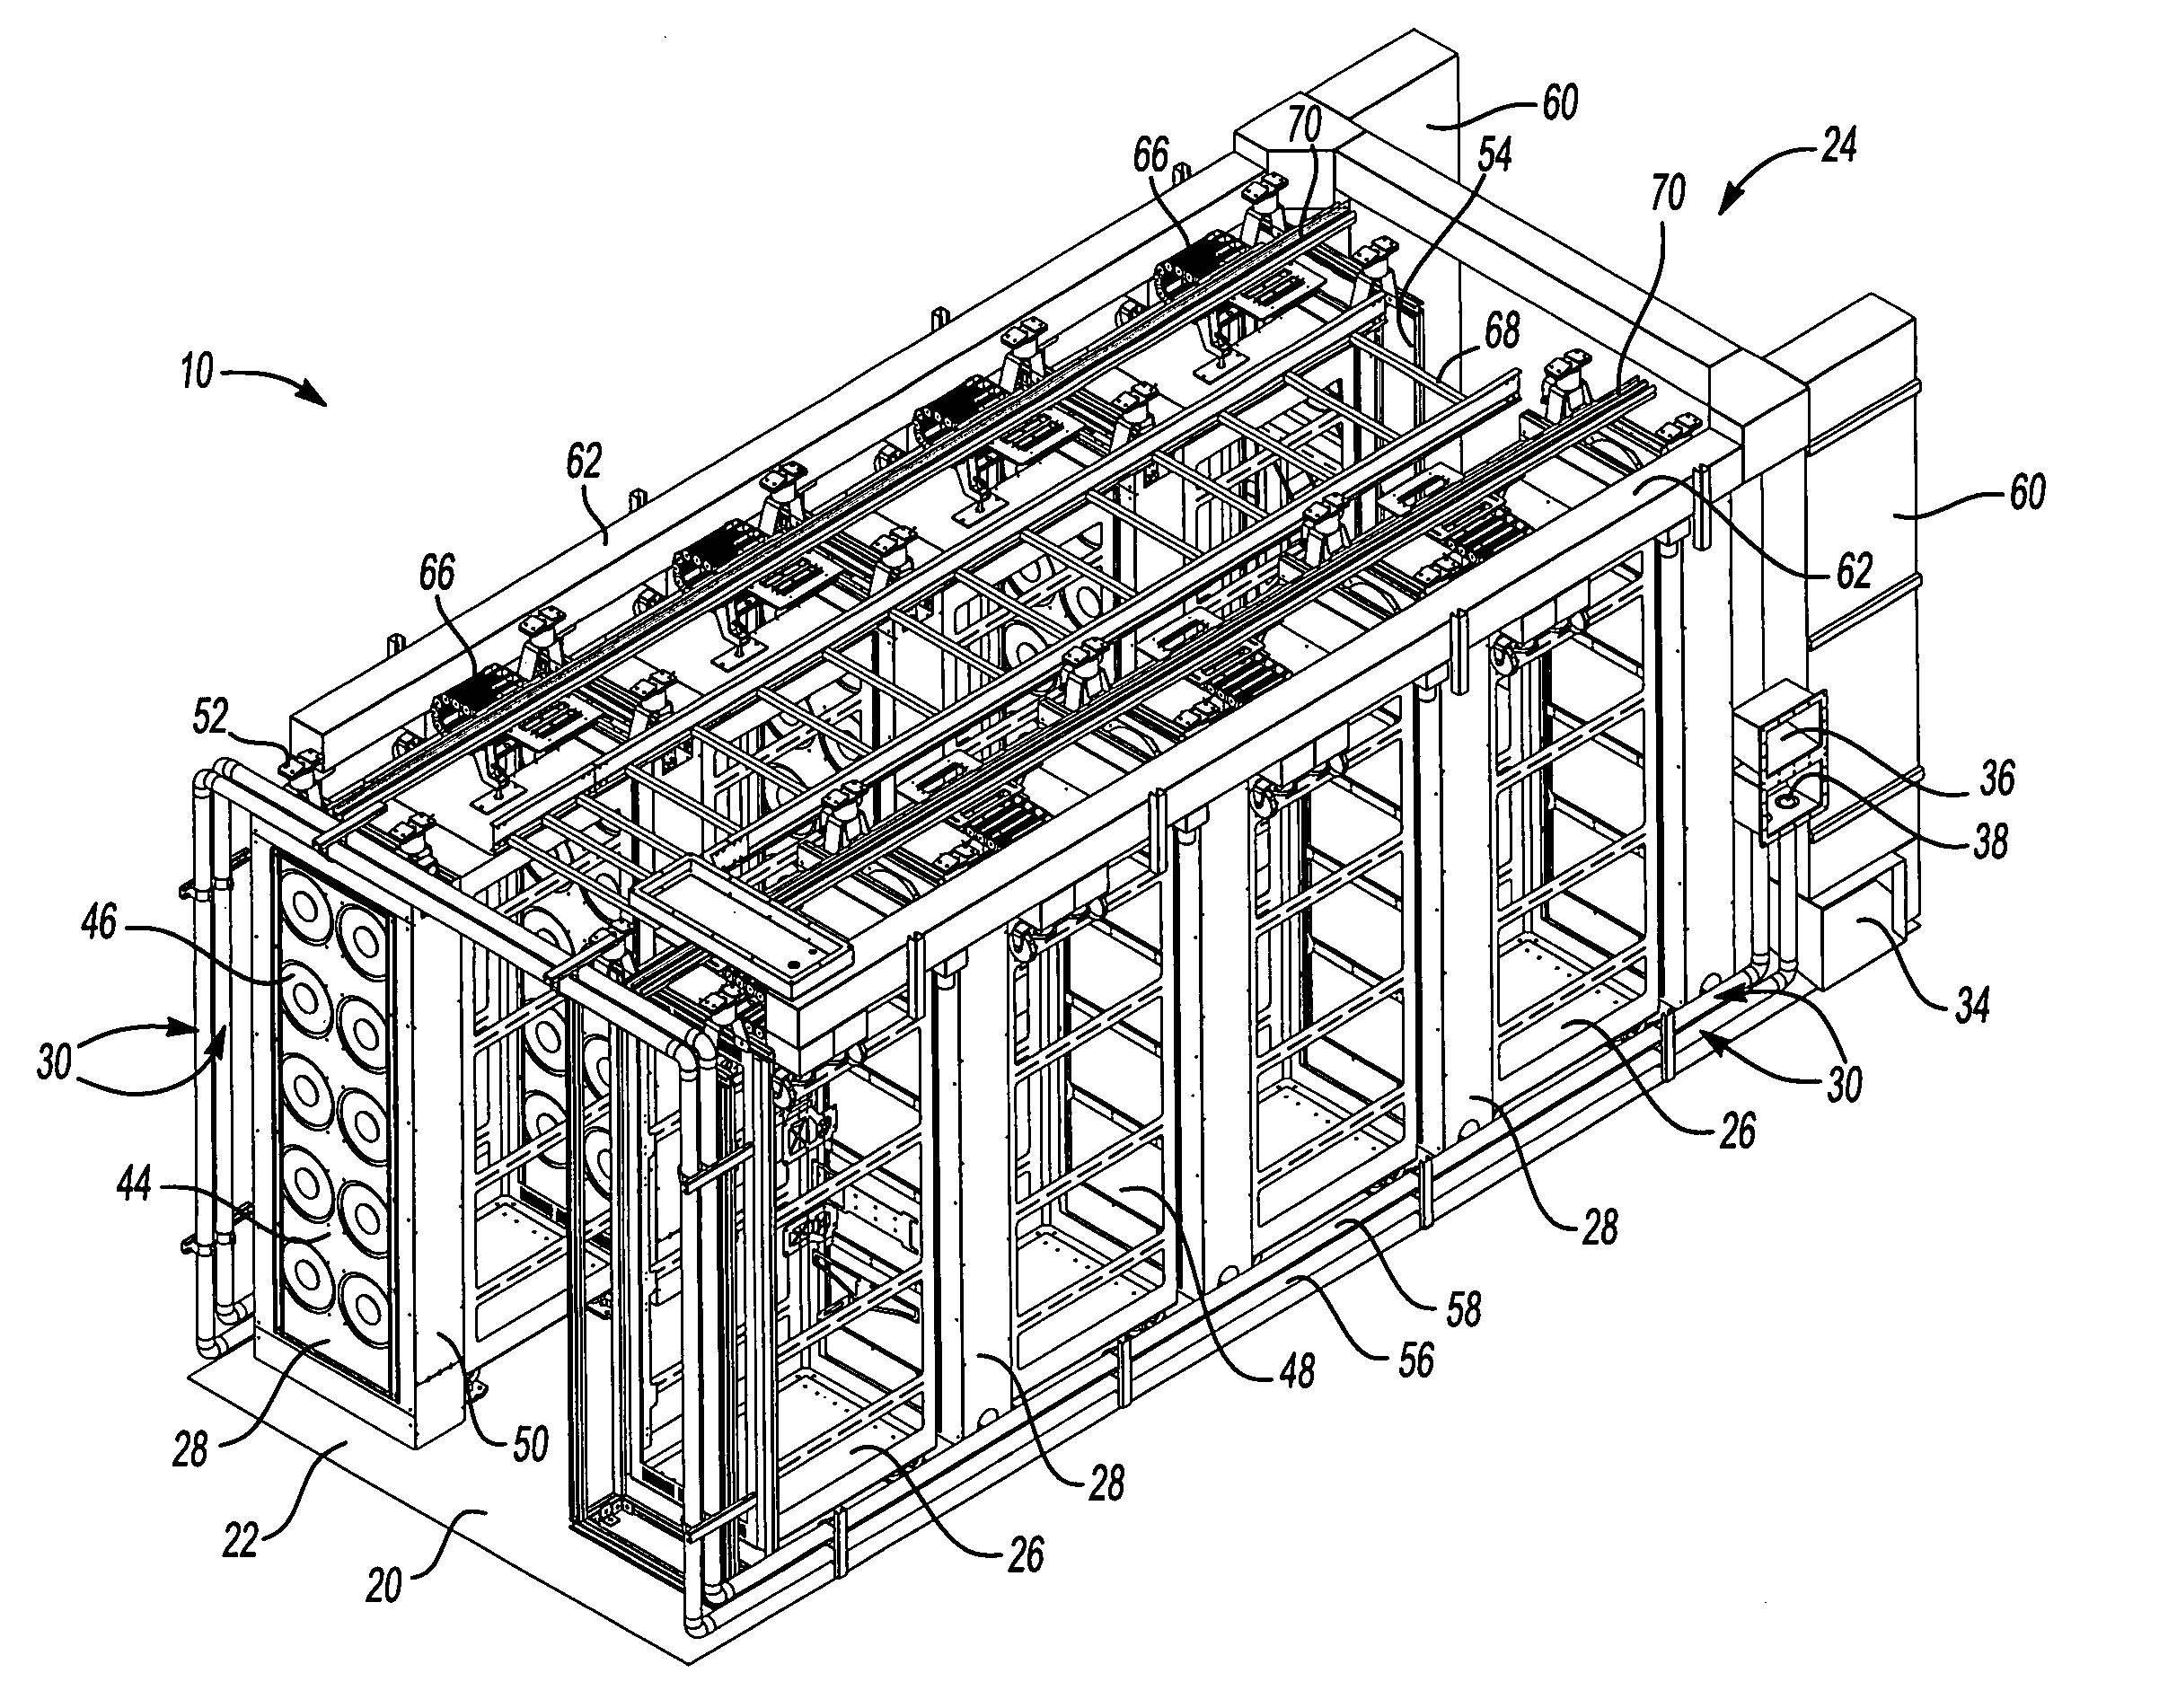 Balanced chilled fluid cooling system for a data center in a shipping container